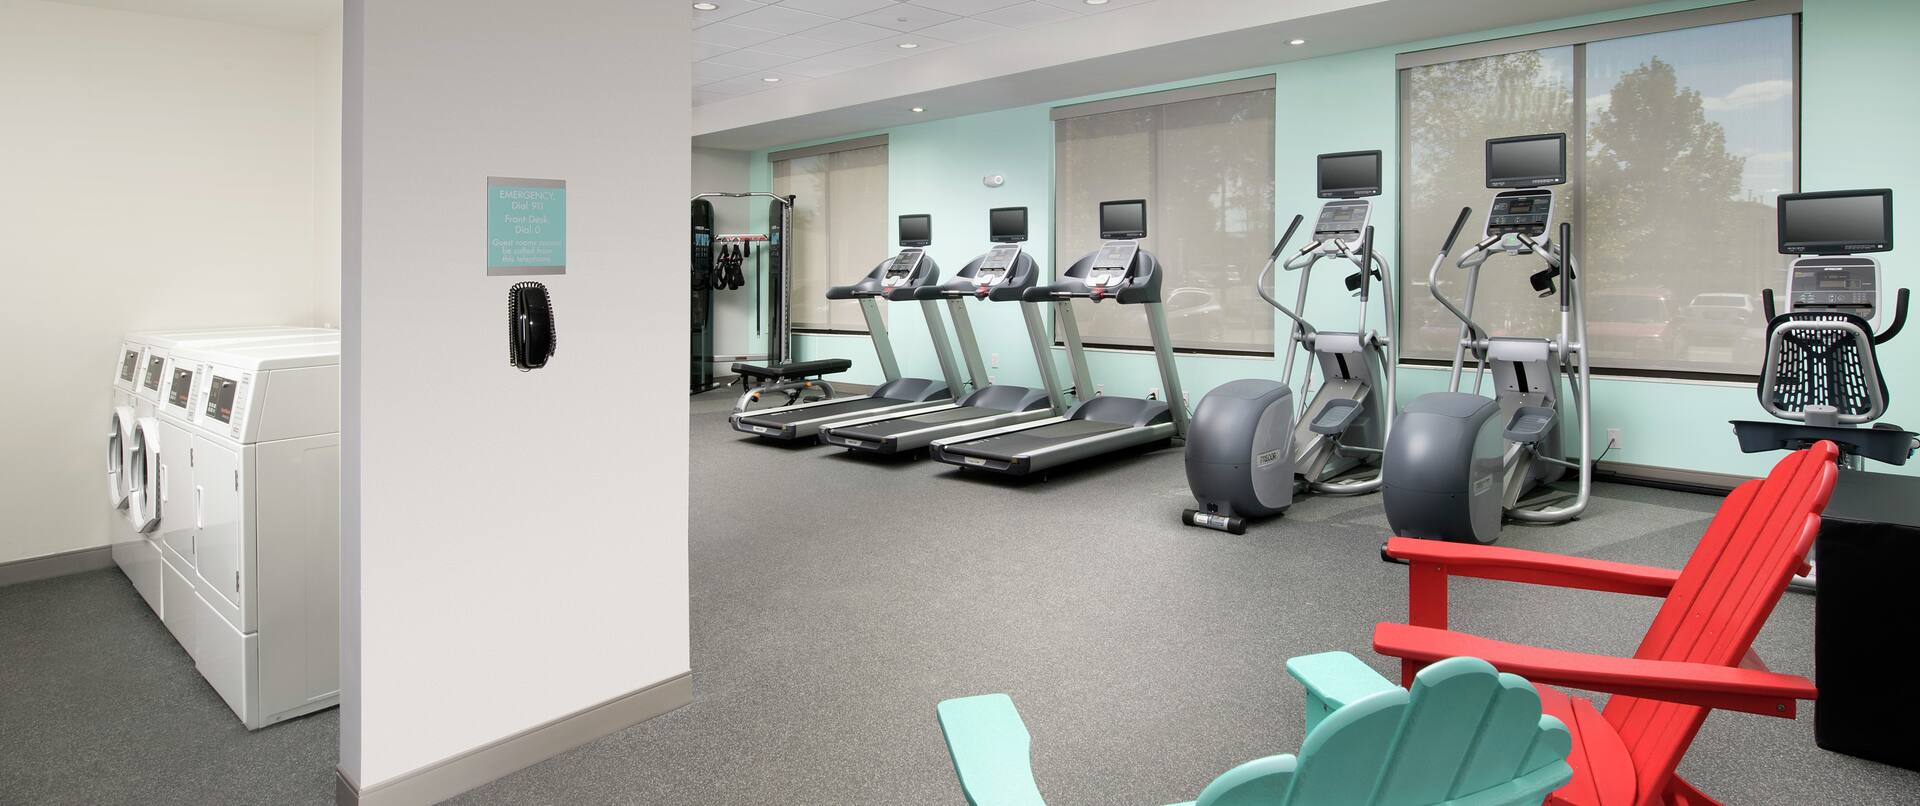 Spin2Cycle Fitness Area With Cardio Equipment, Lounge Seating, and Open Doorway to Laundry Room With Coin Operated Washing and Drying Machines